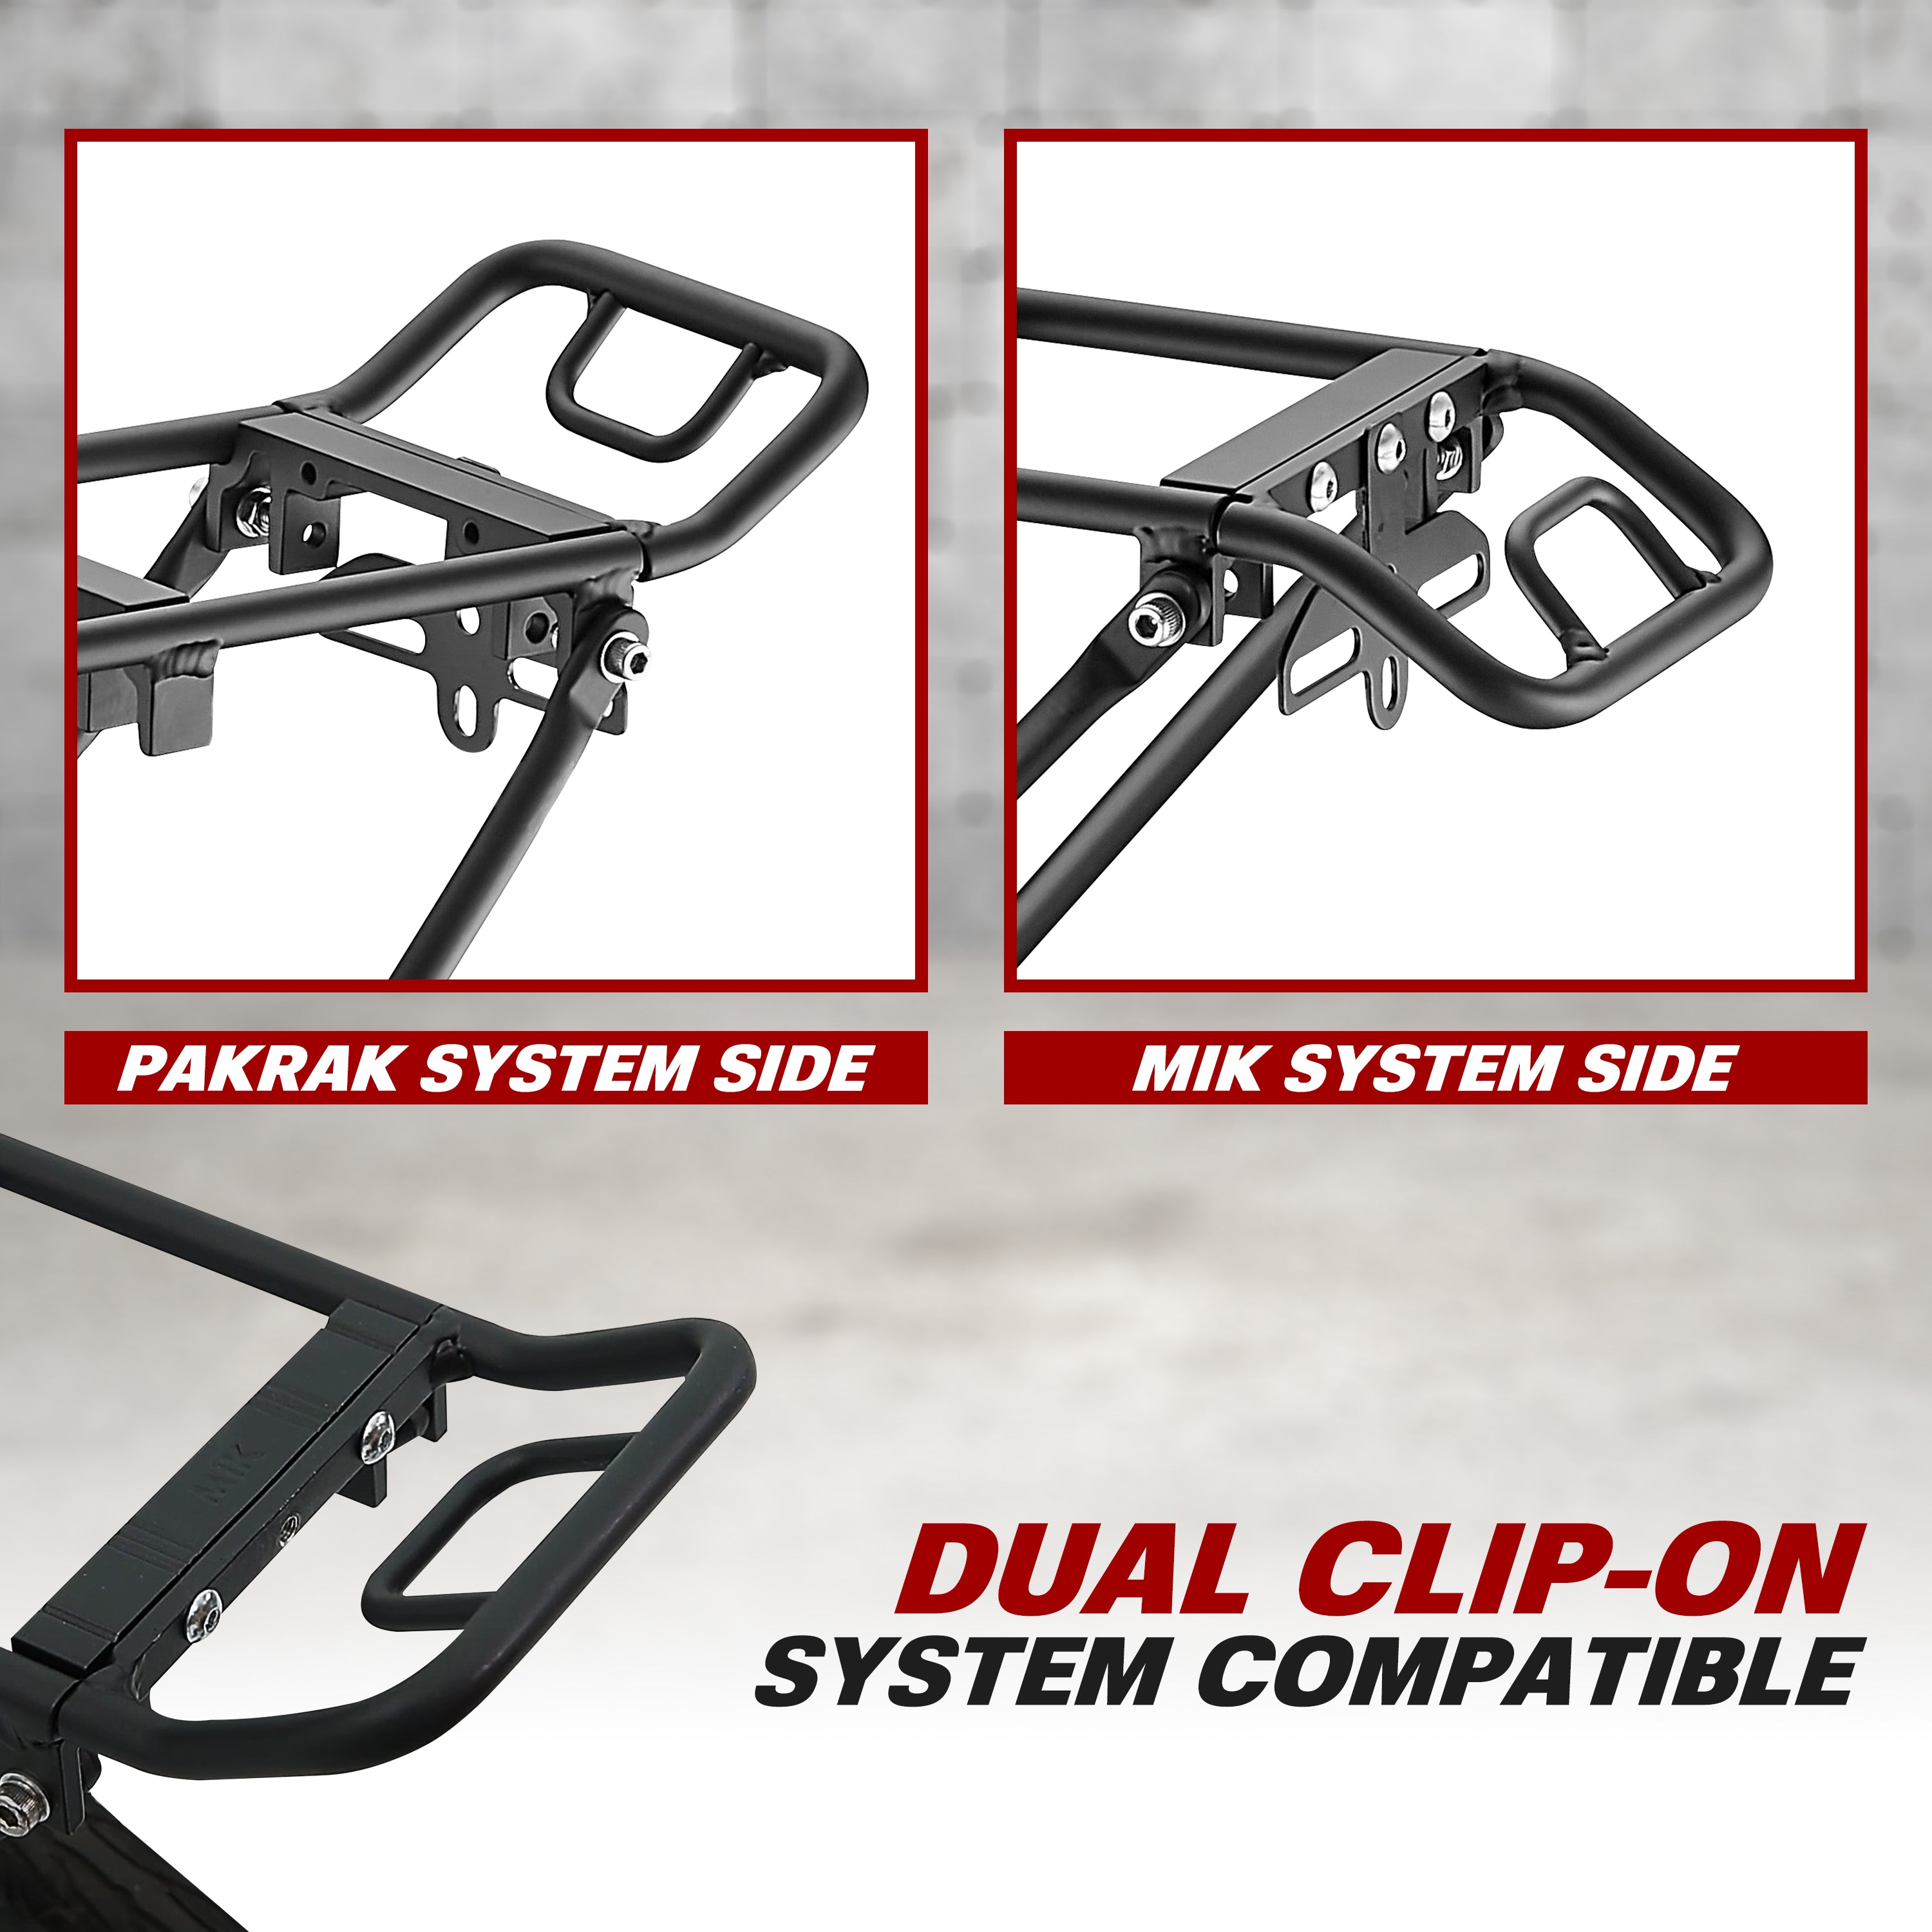 Dual Clip-On System Compatible